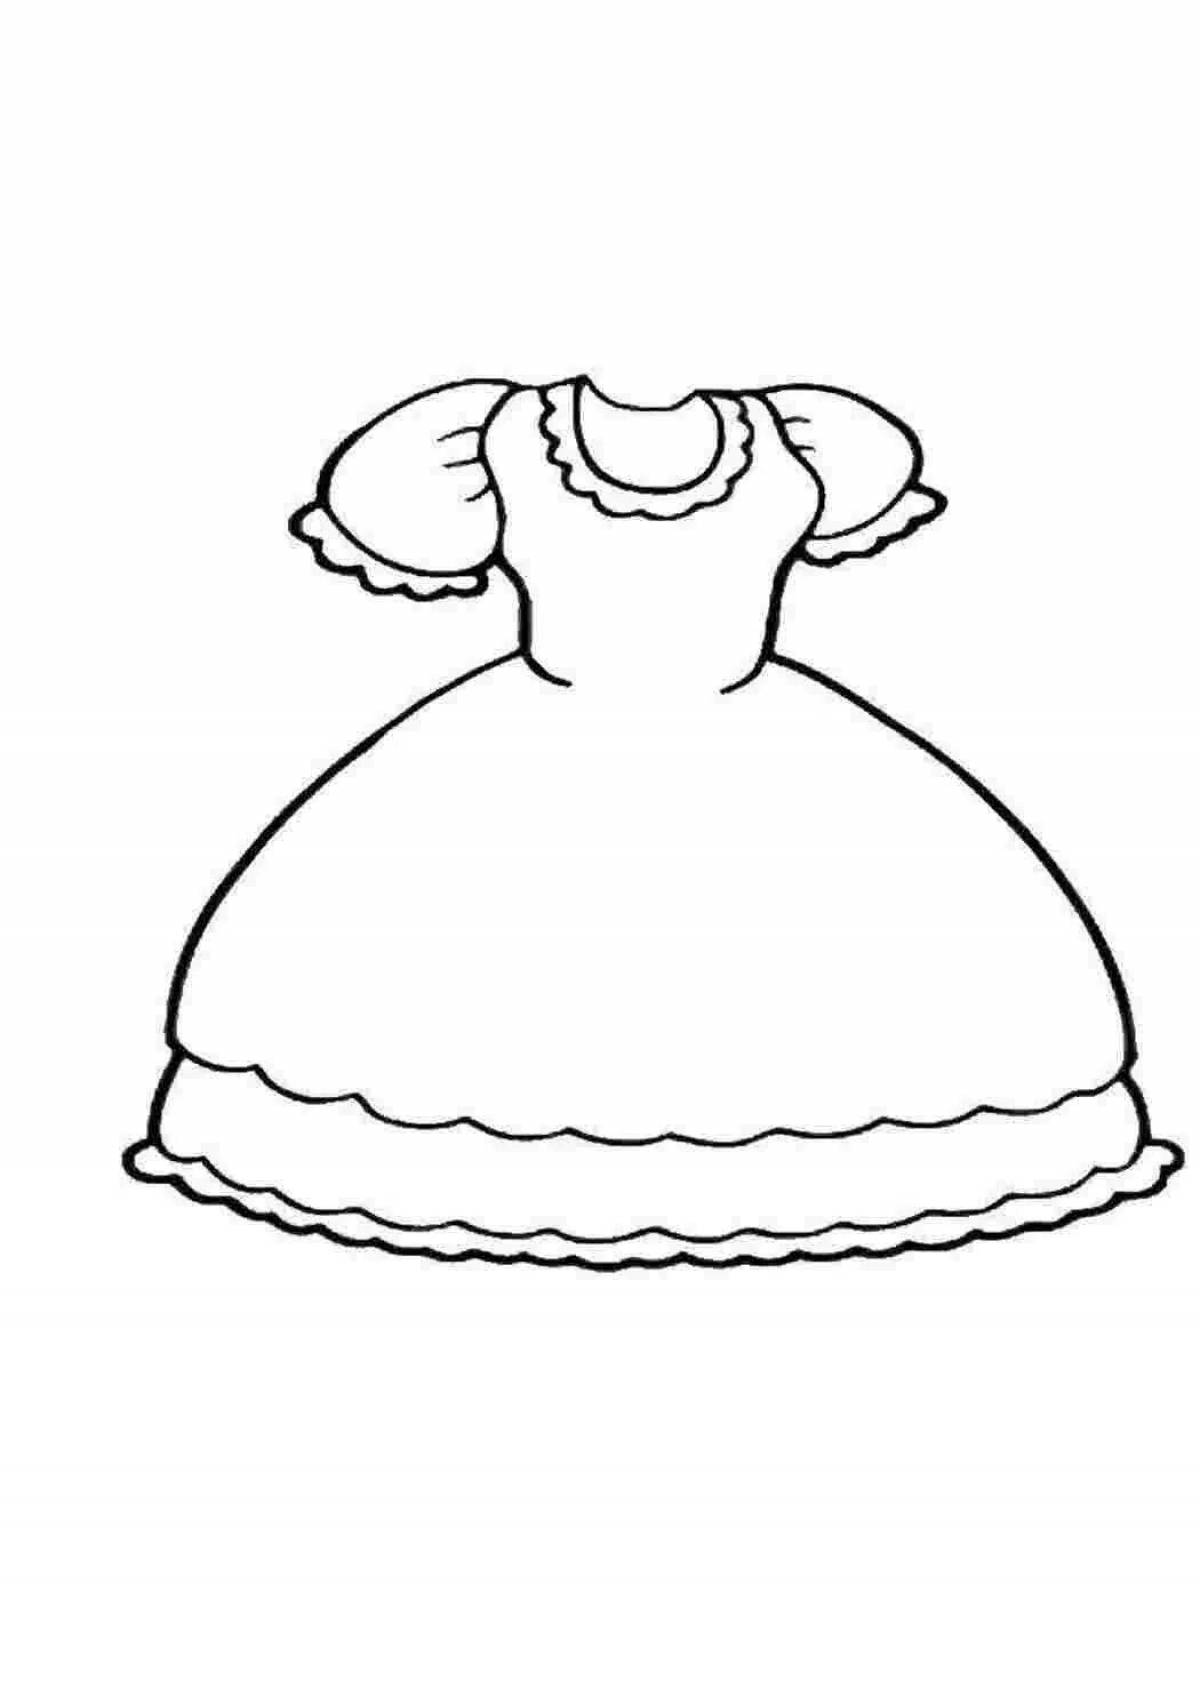 Coloring page exquisite dress